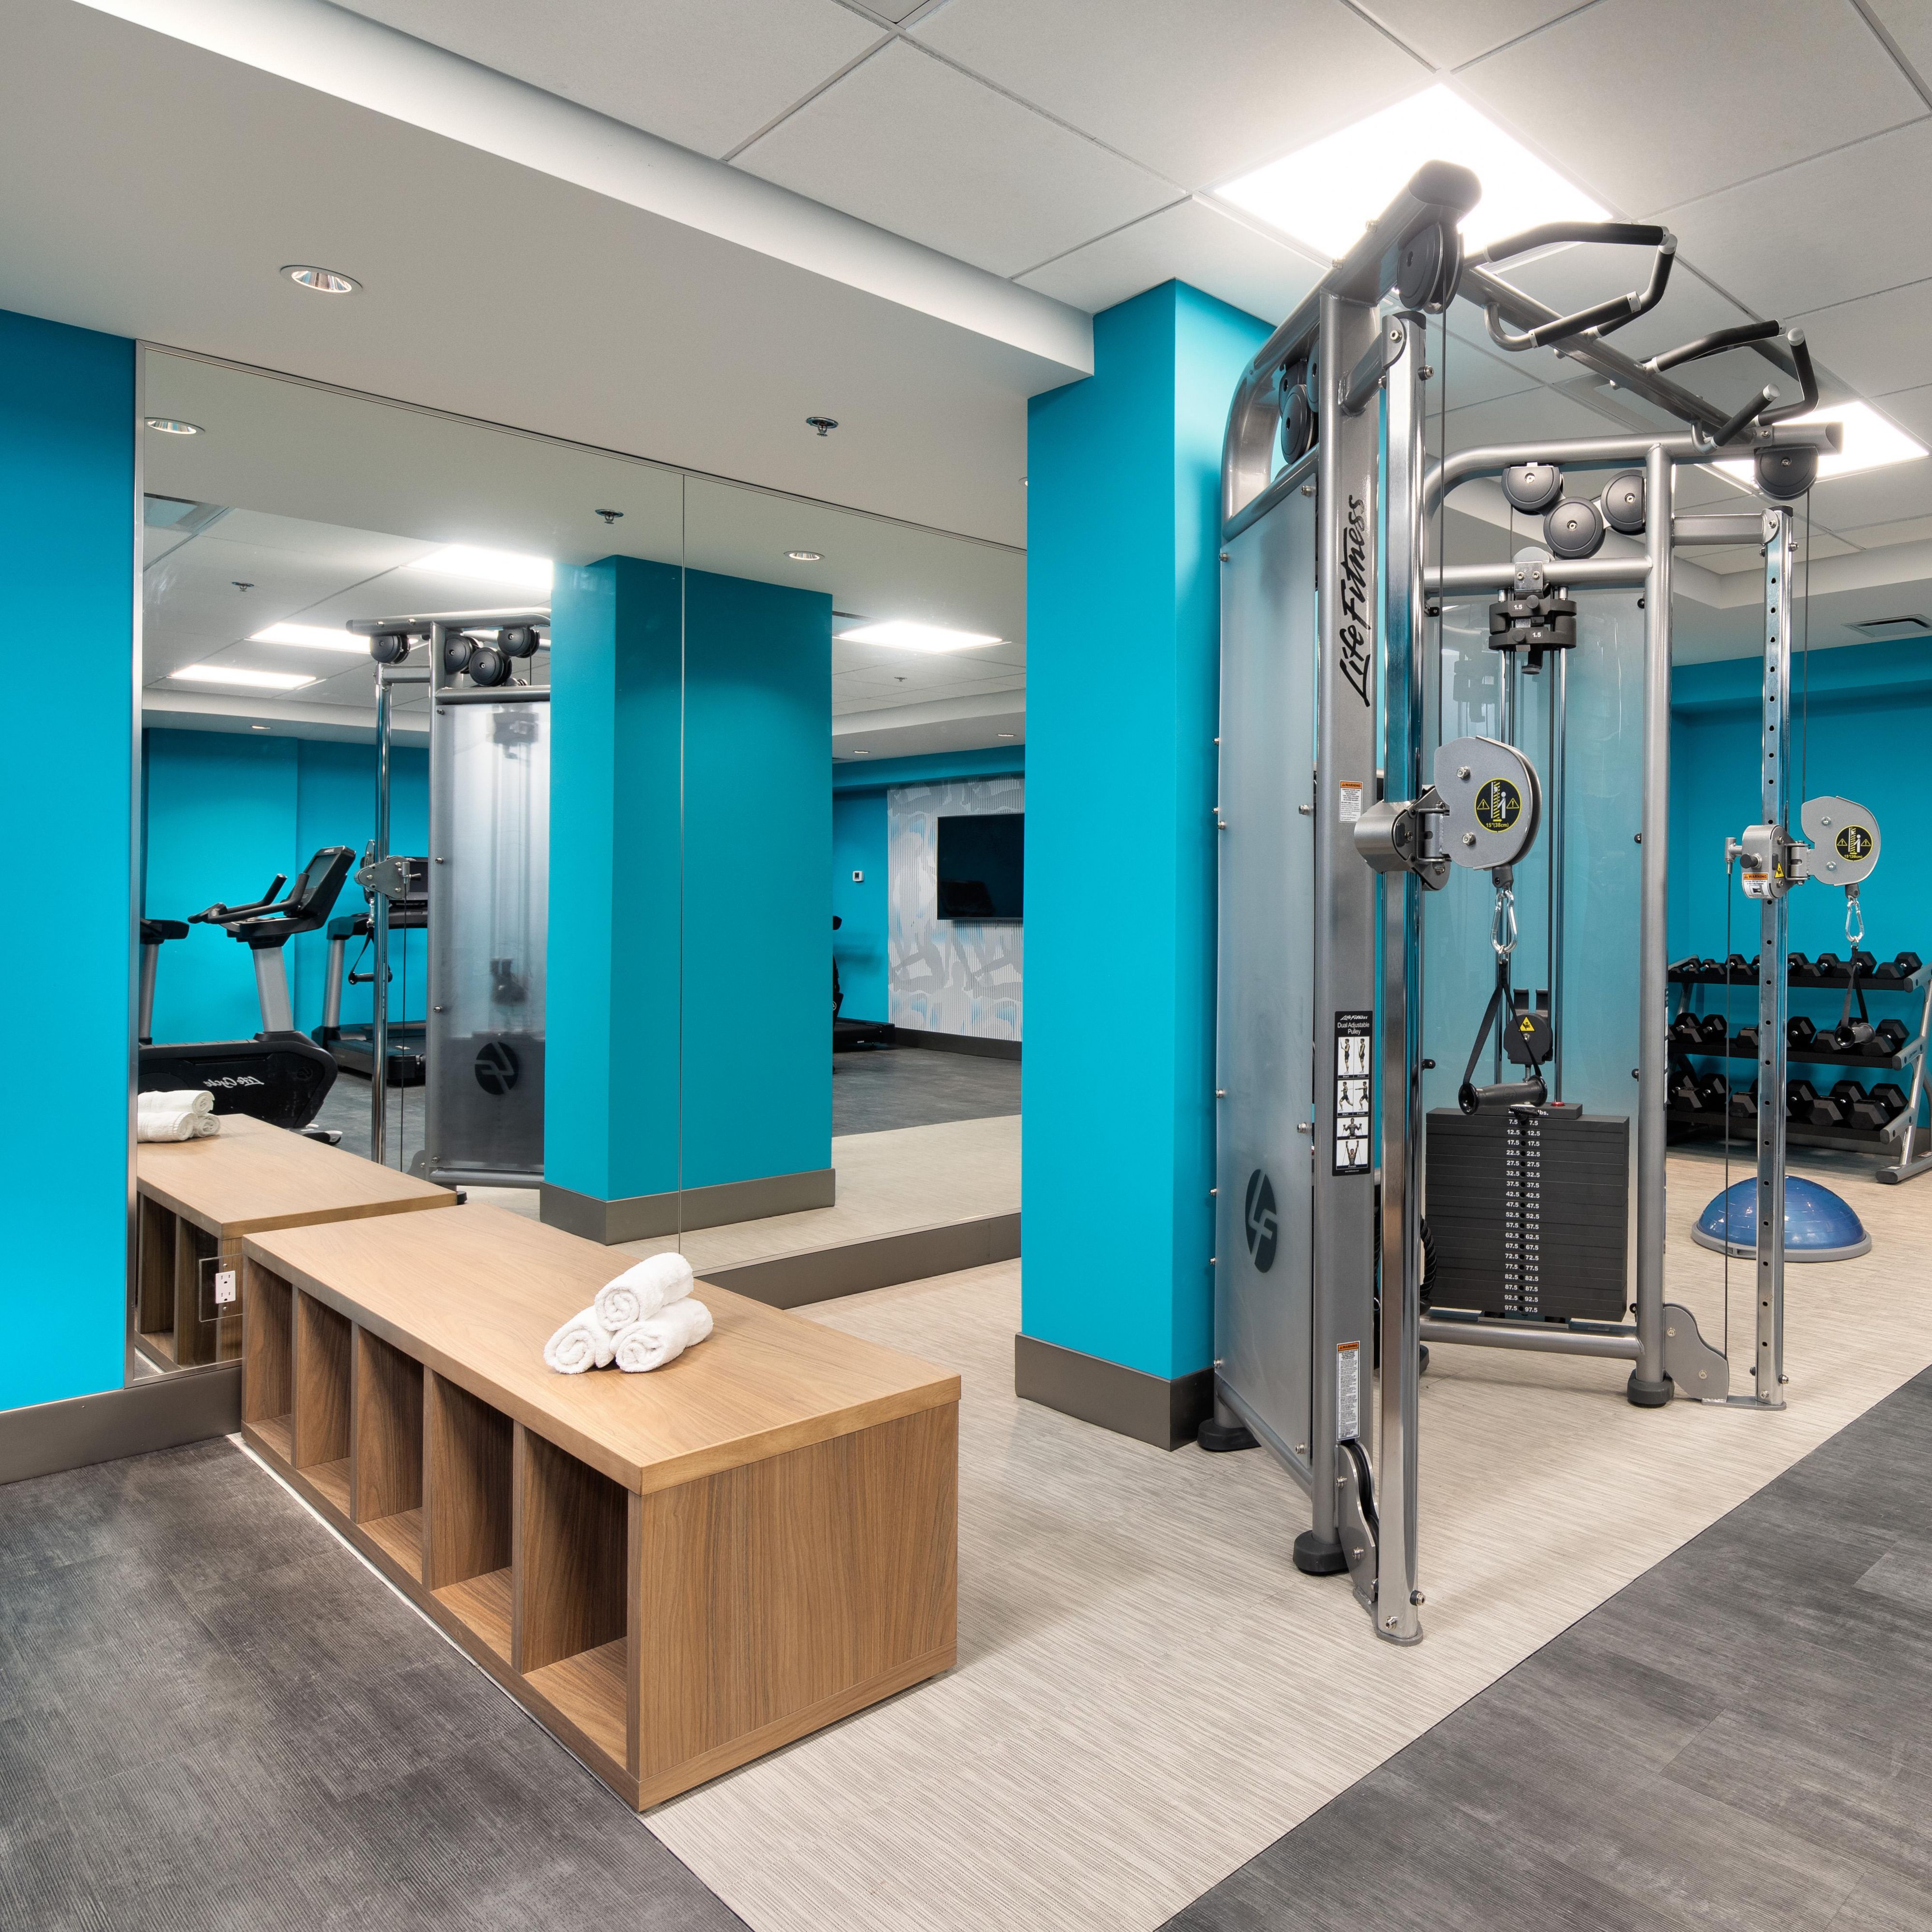 Our fitness center has everything you need to stay on track 